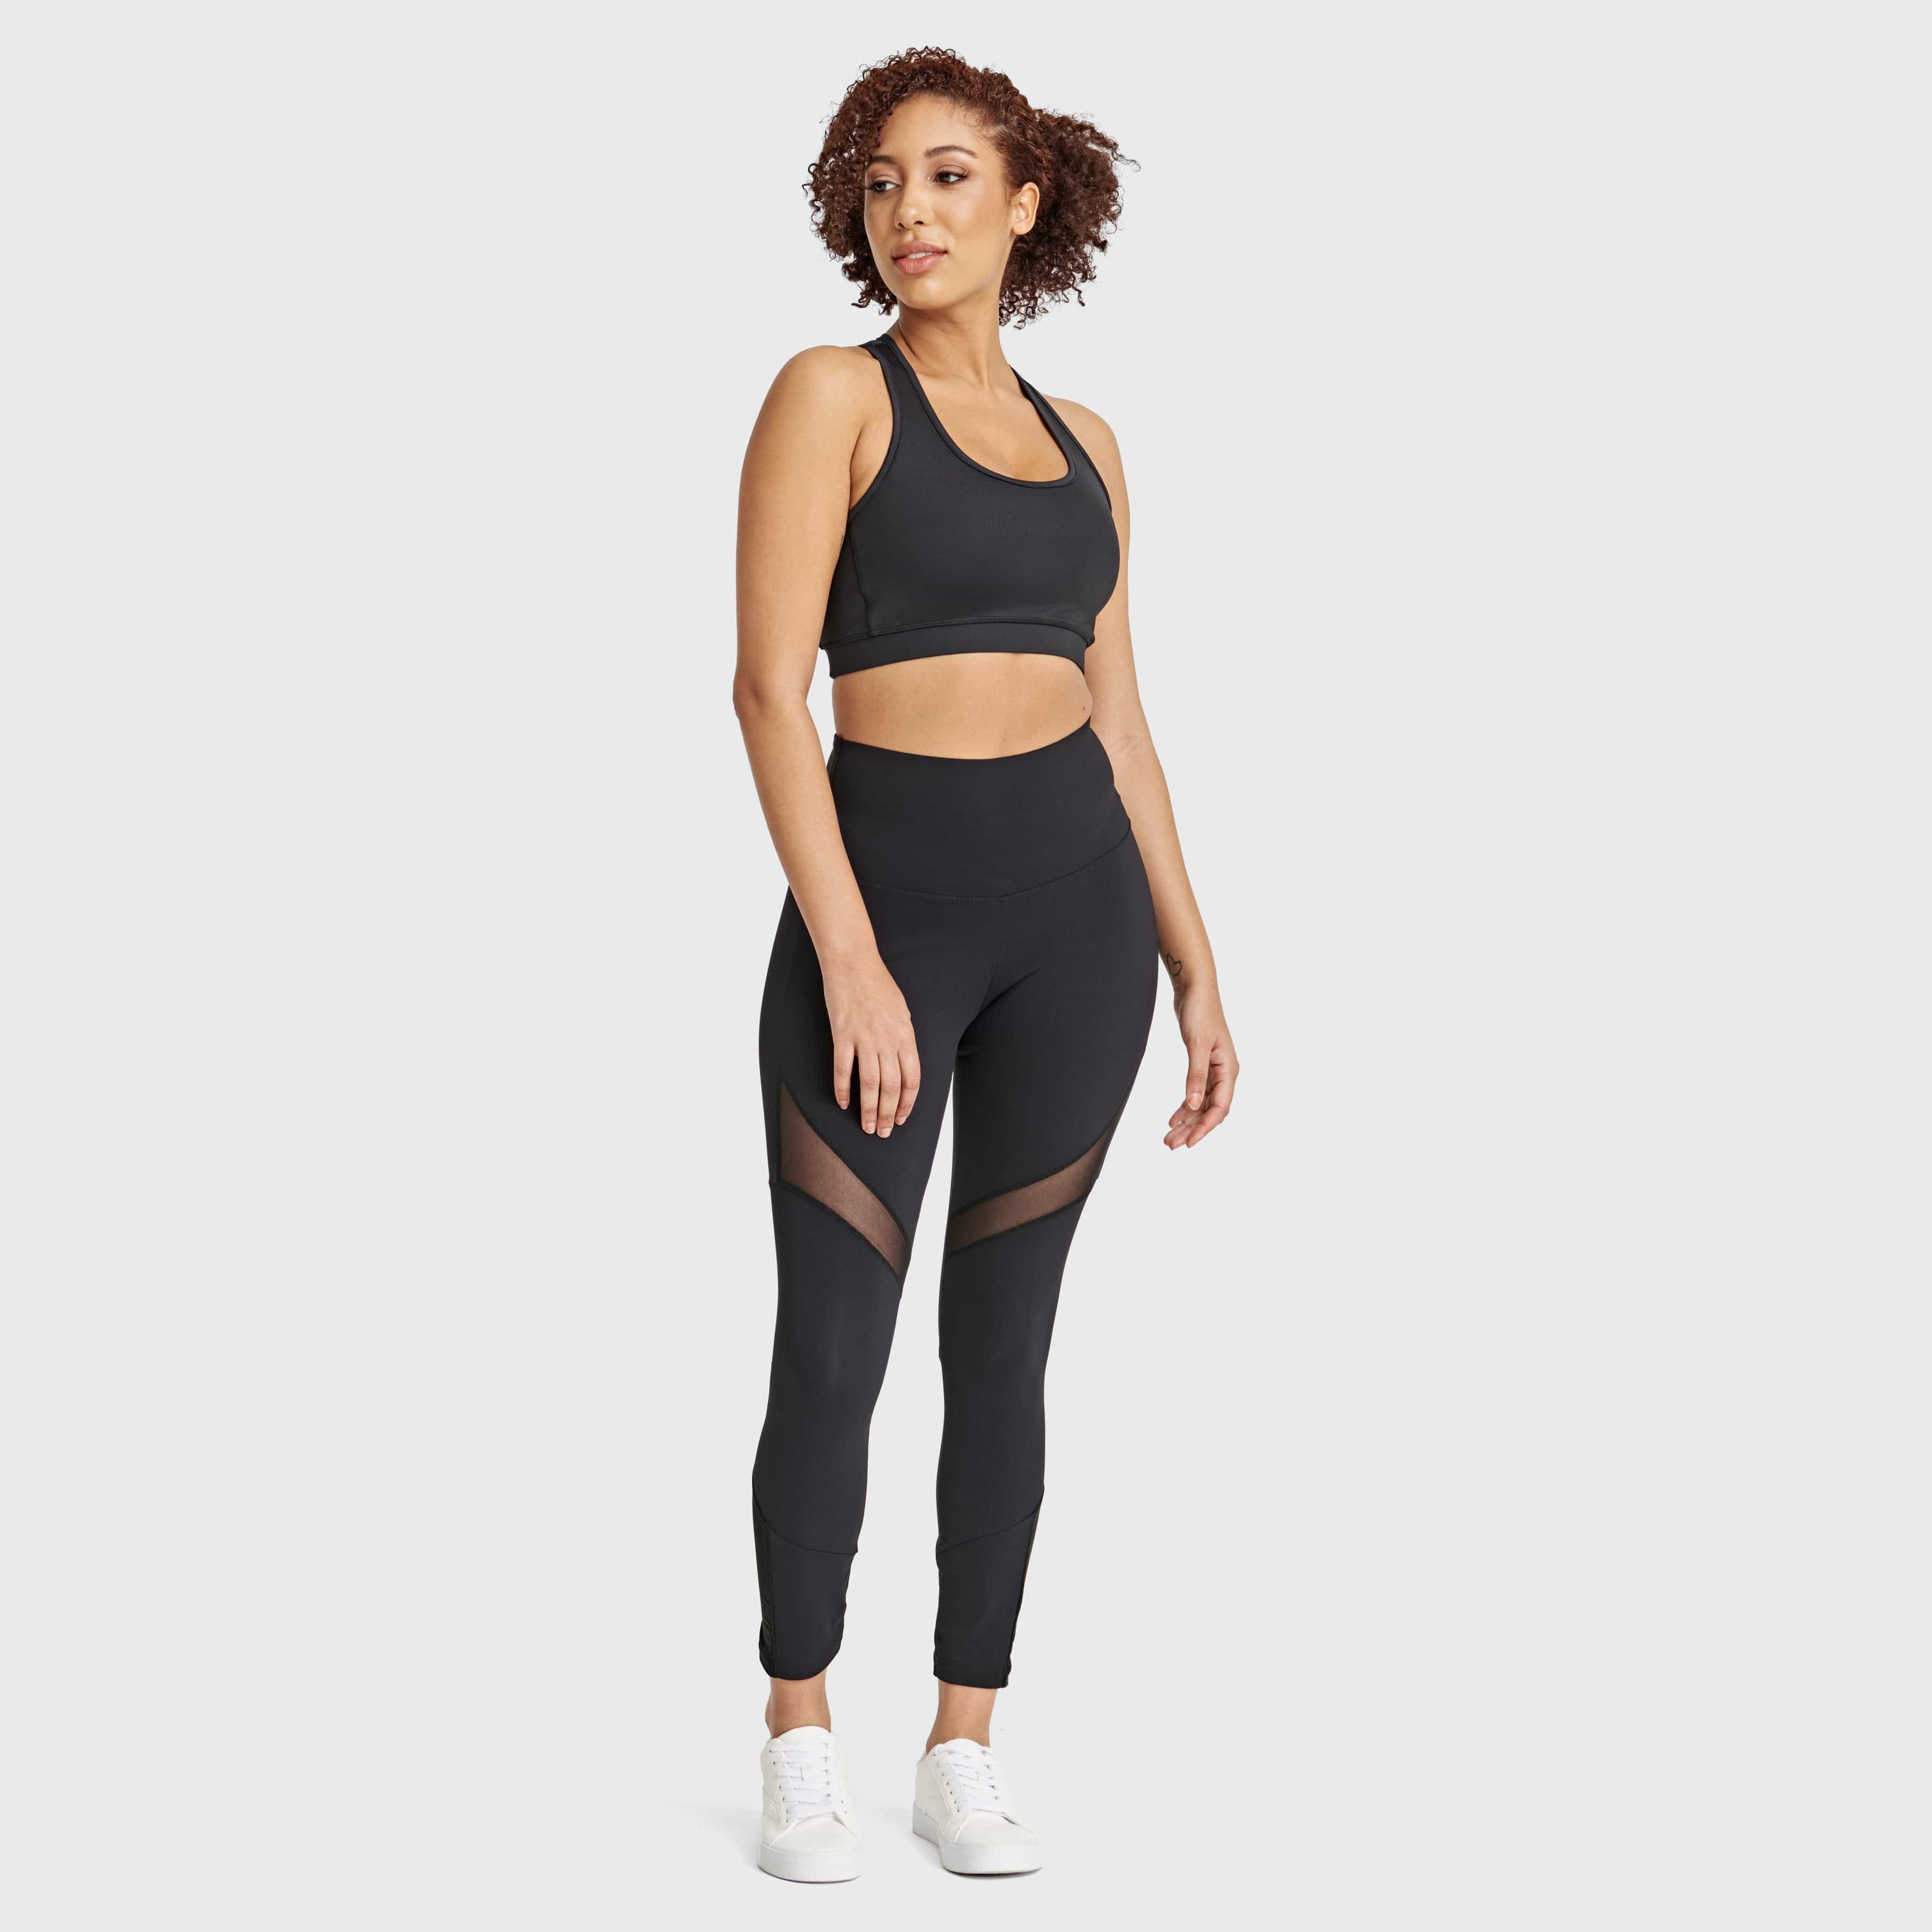 Superfit Diwo Pro With Mesh Detailing - High Waisted - Petite Length - Black 3